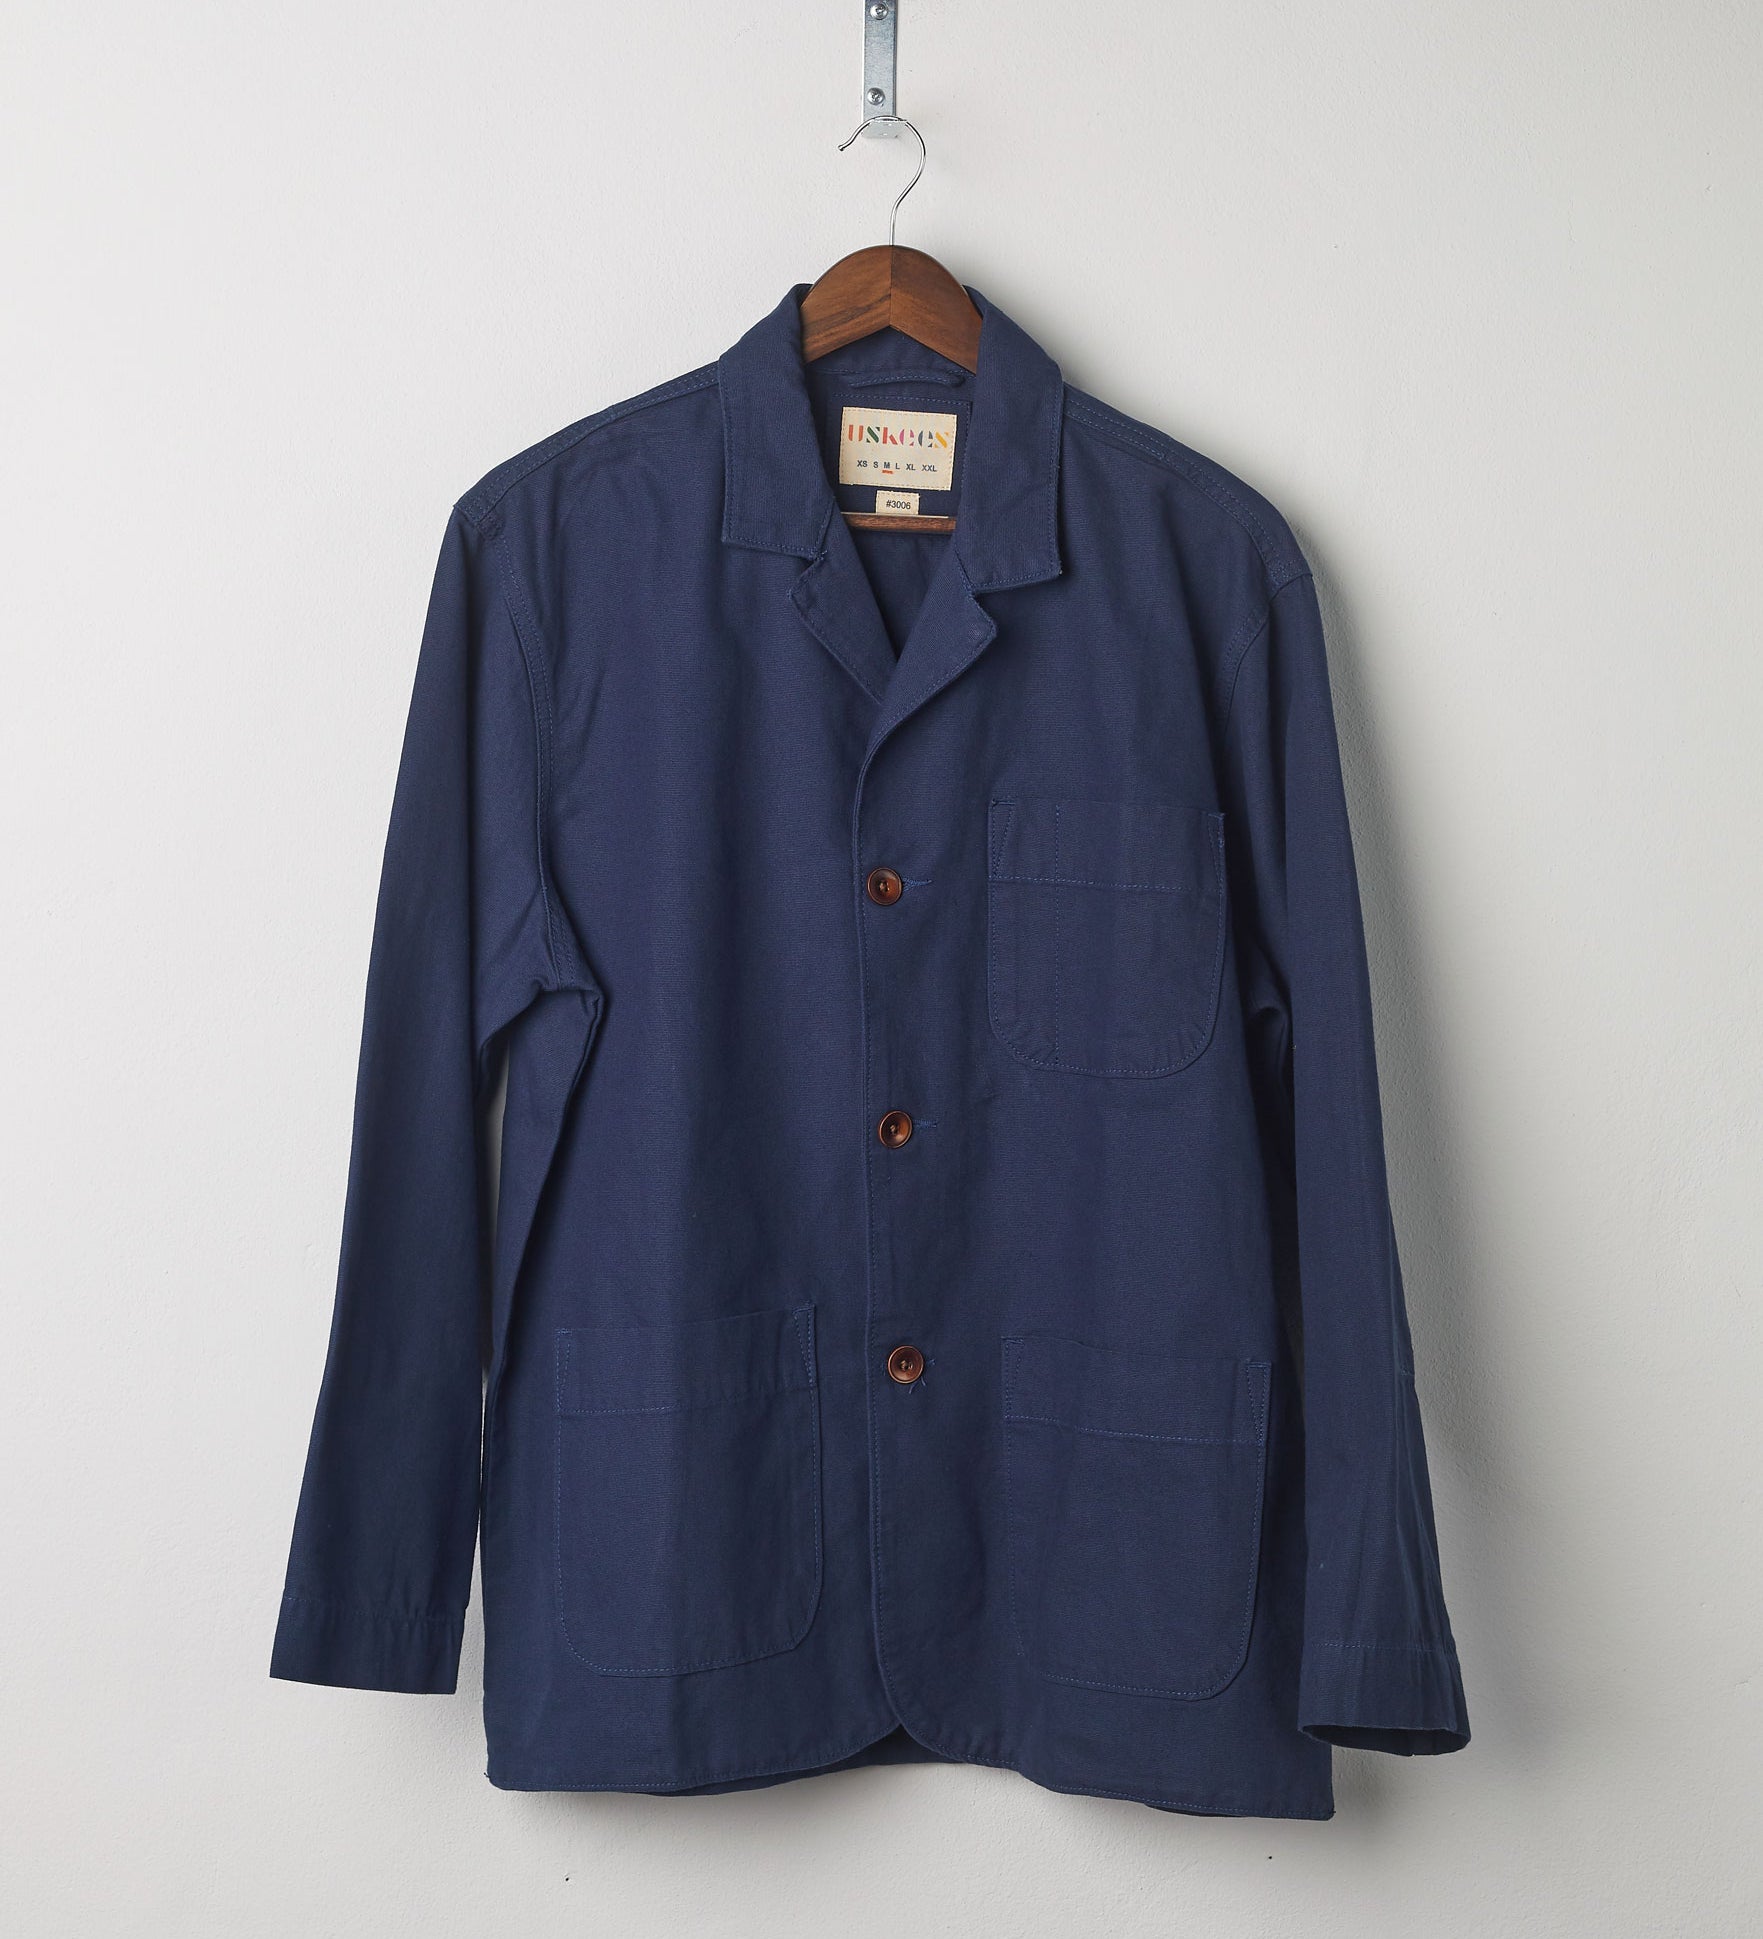 Front view of navy-blue blazer with 3 patch pockets from Uskees, presented on a hanger.